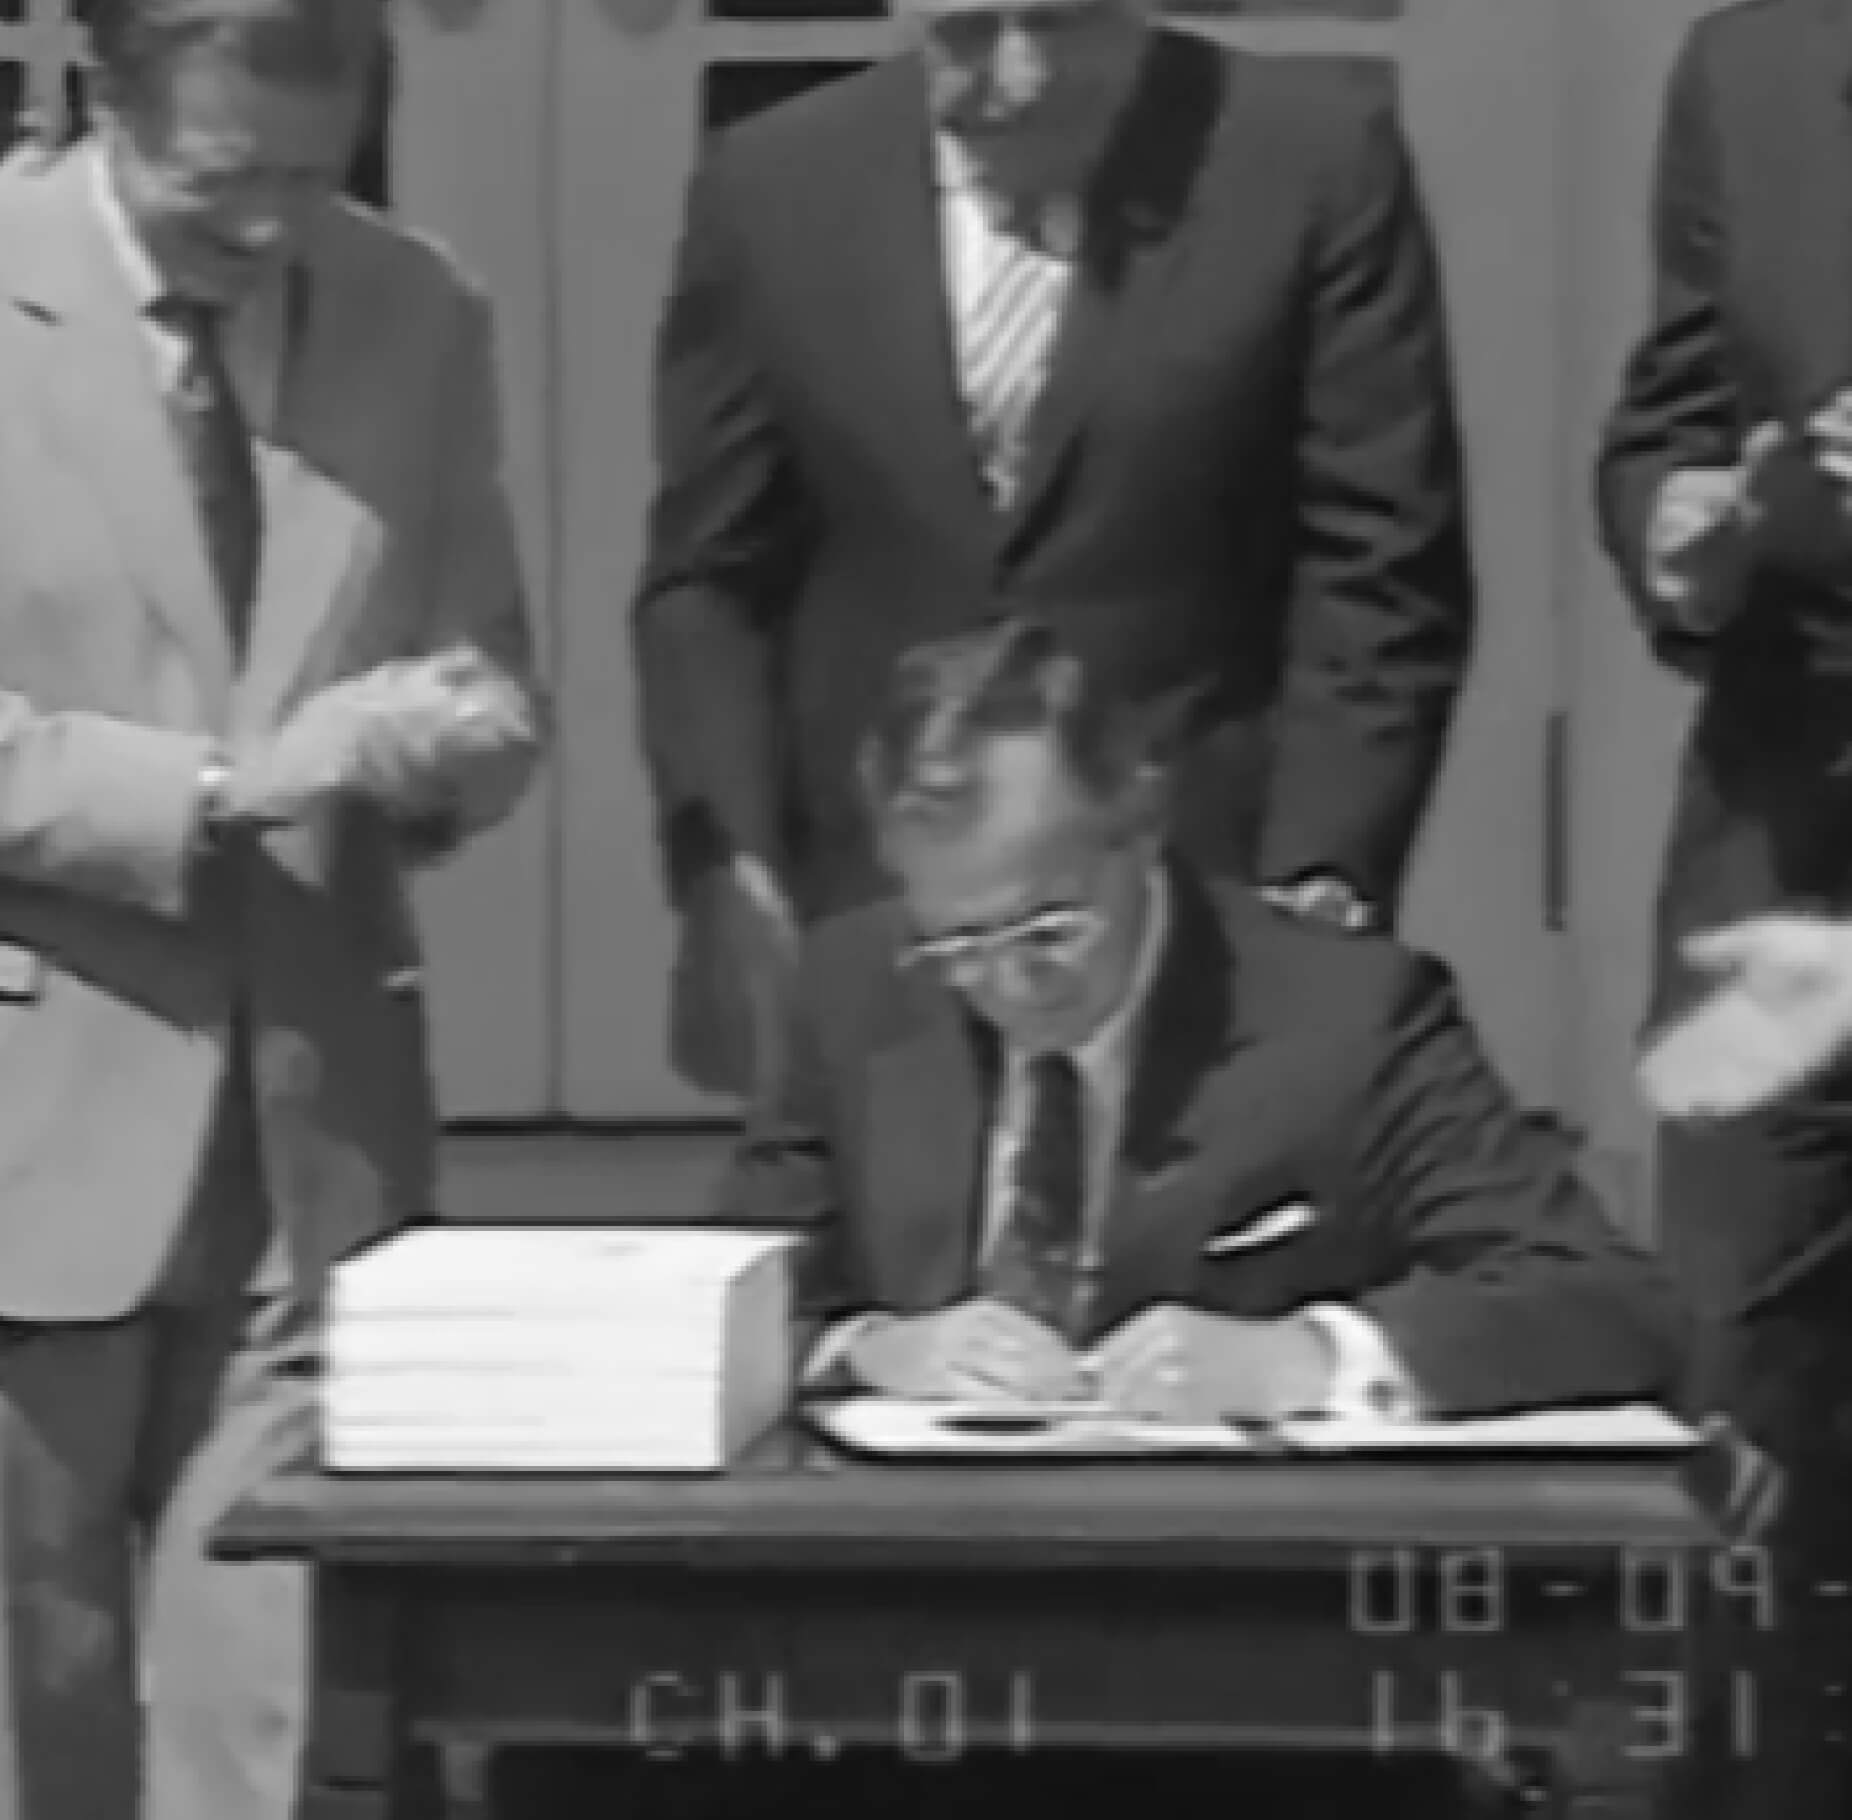 Background image: President George H. W. Bush signs the Financial Institutions Reform